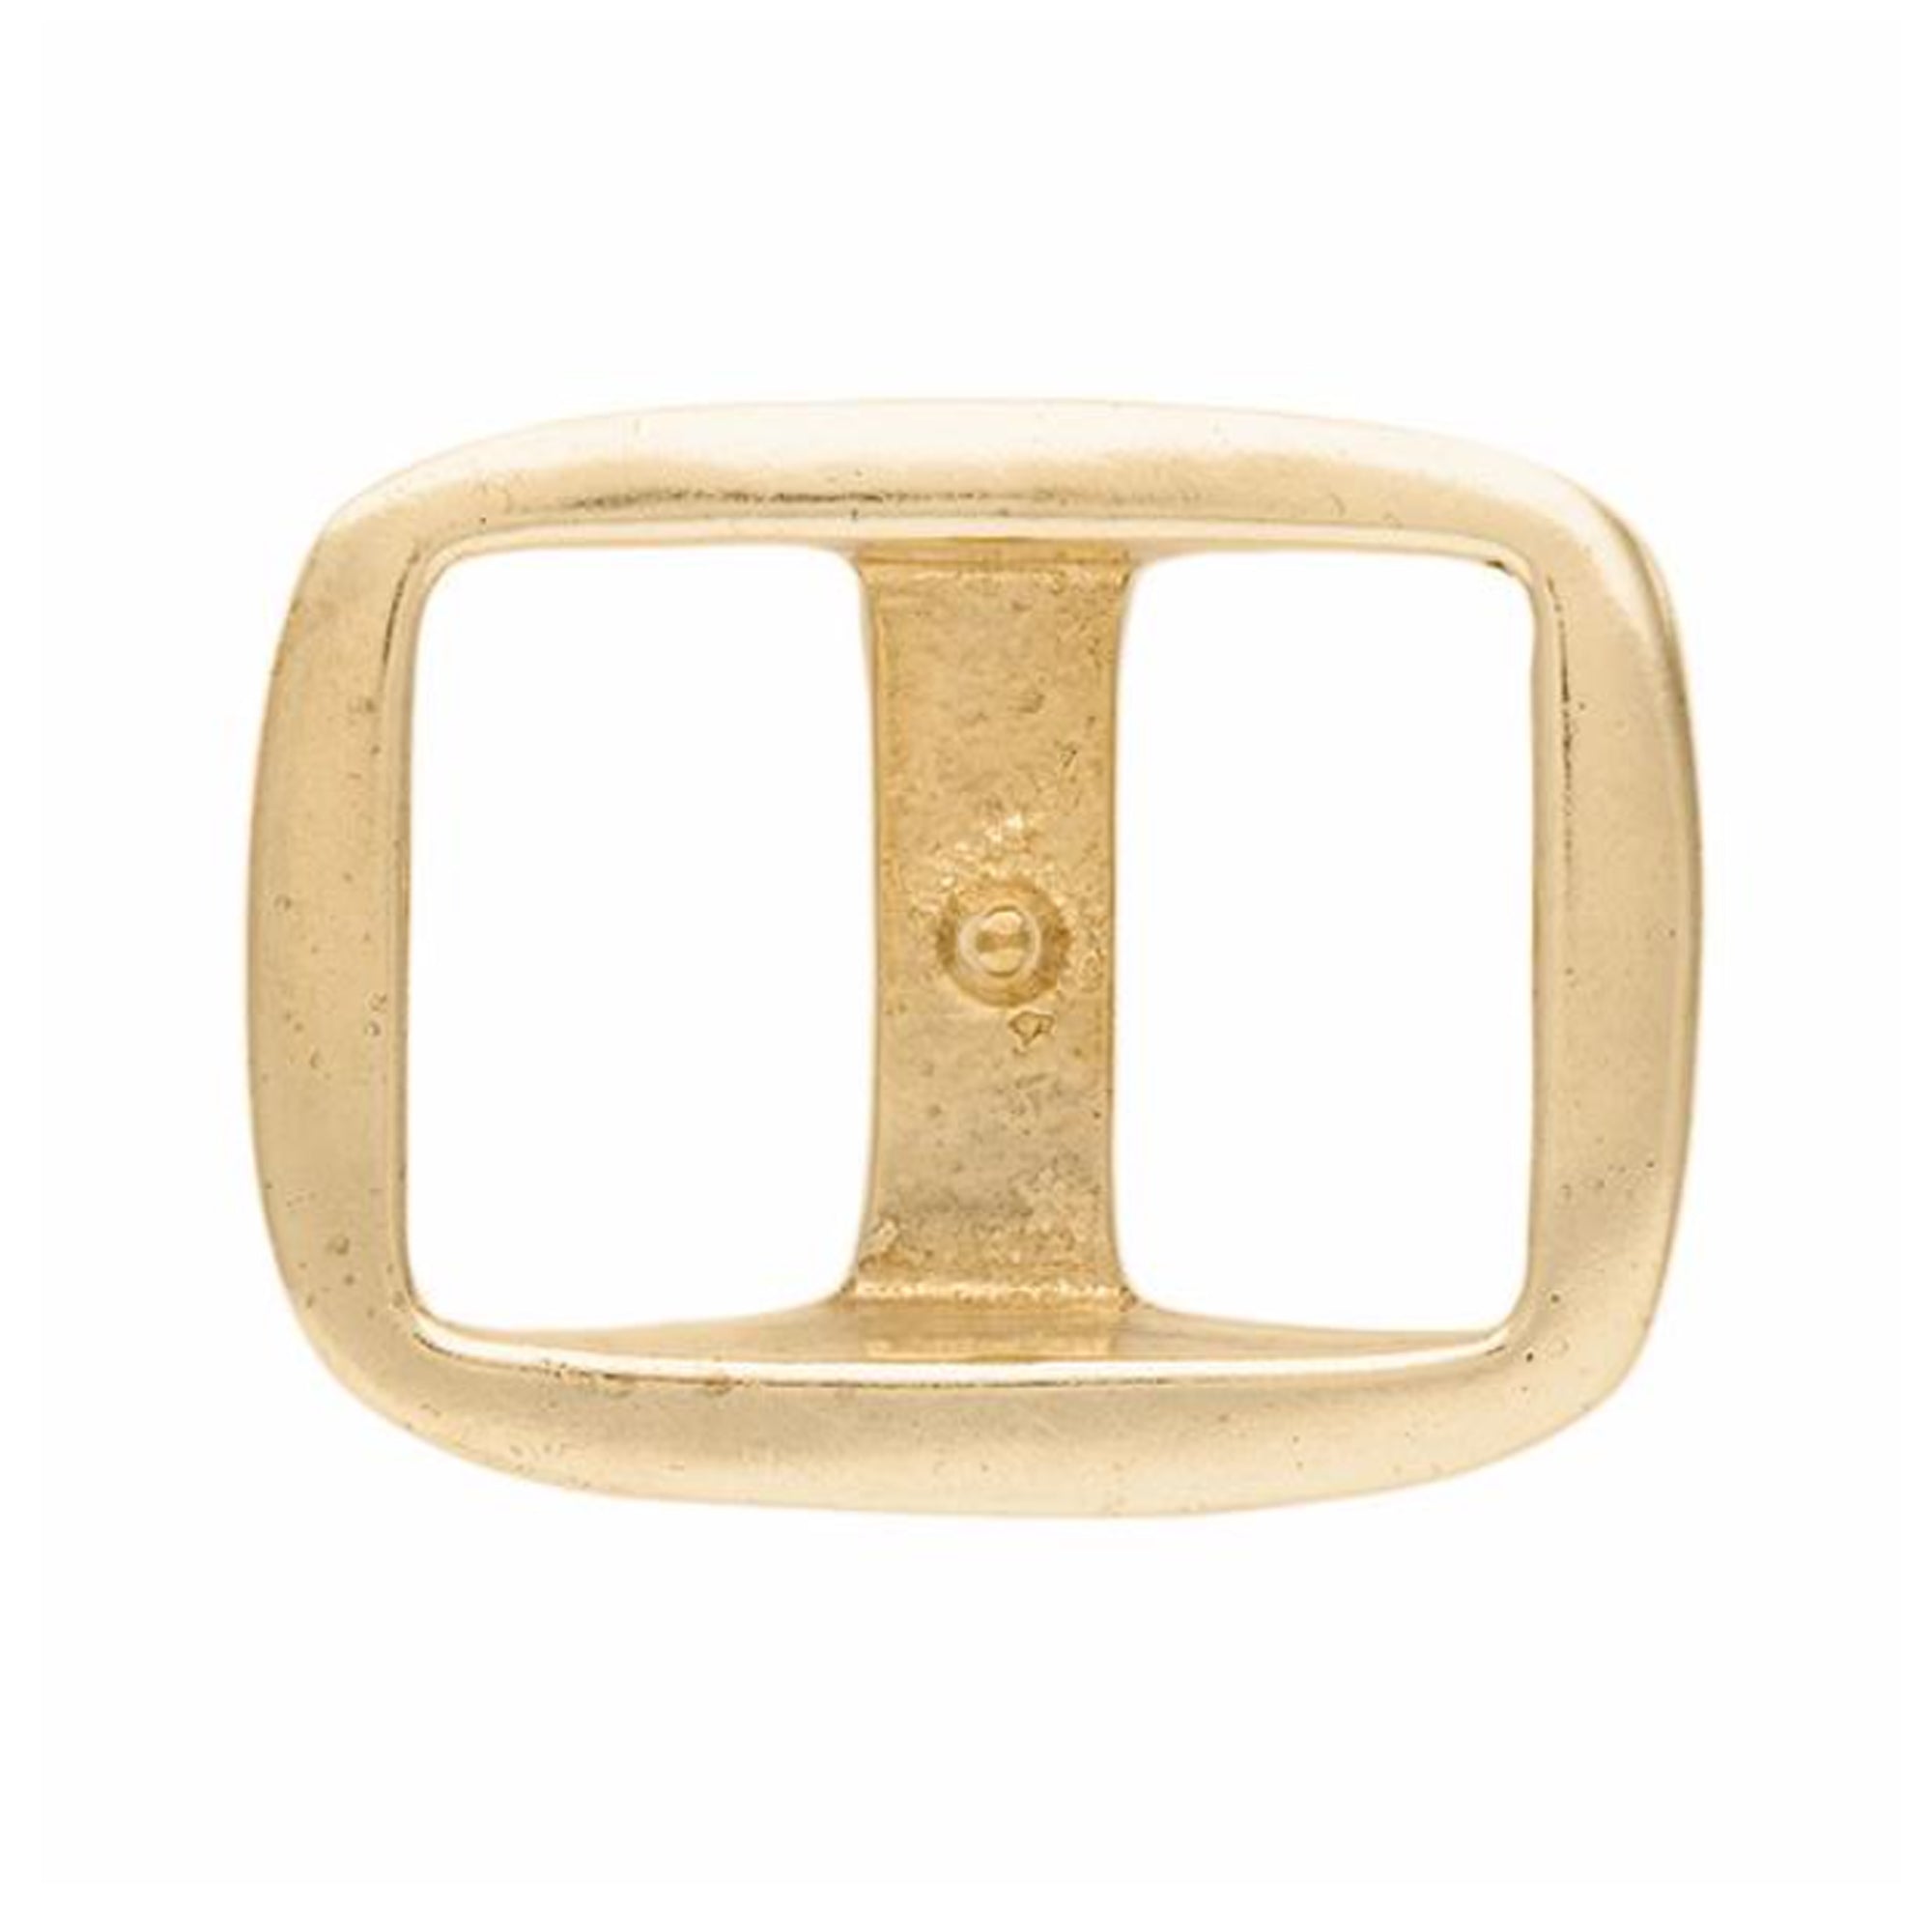 #545 Solid Brass Conway Buckle Flat 1-1/2"